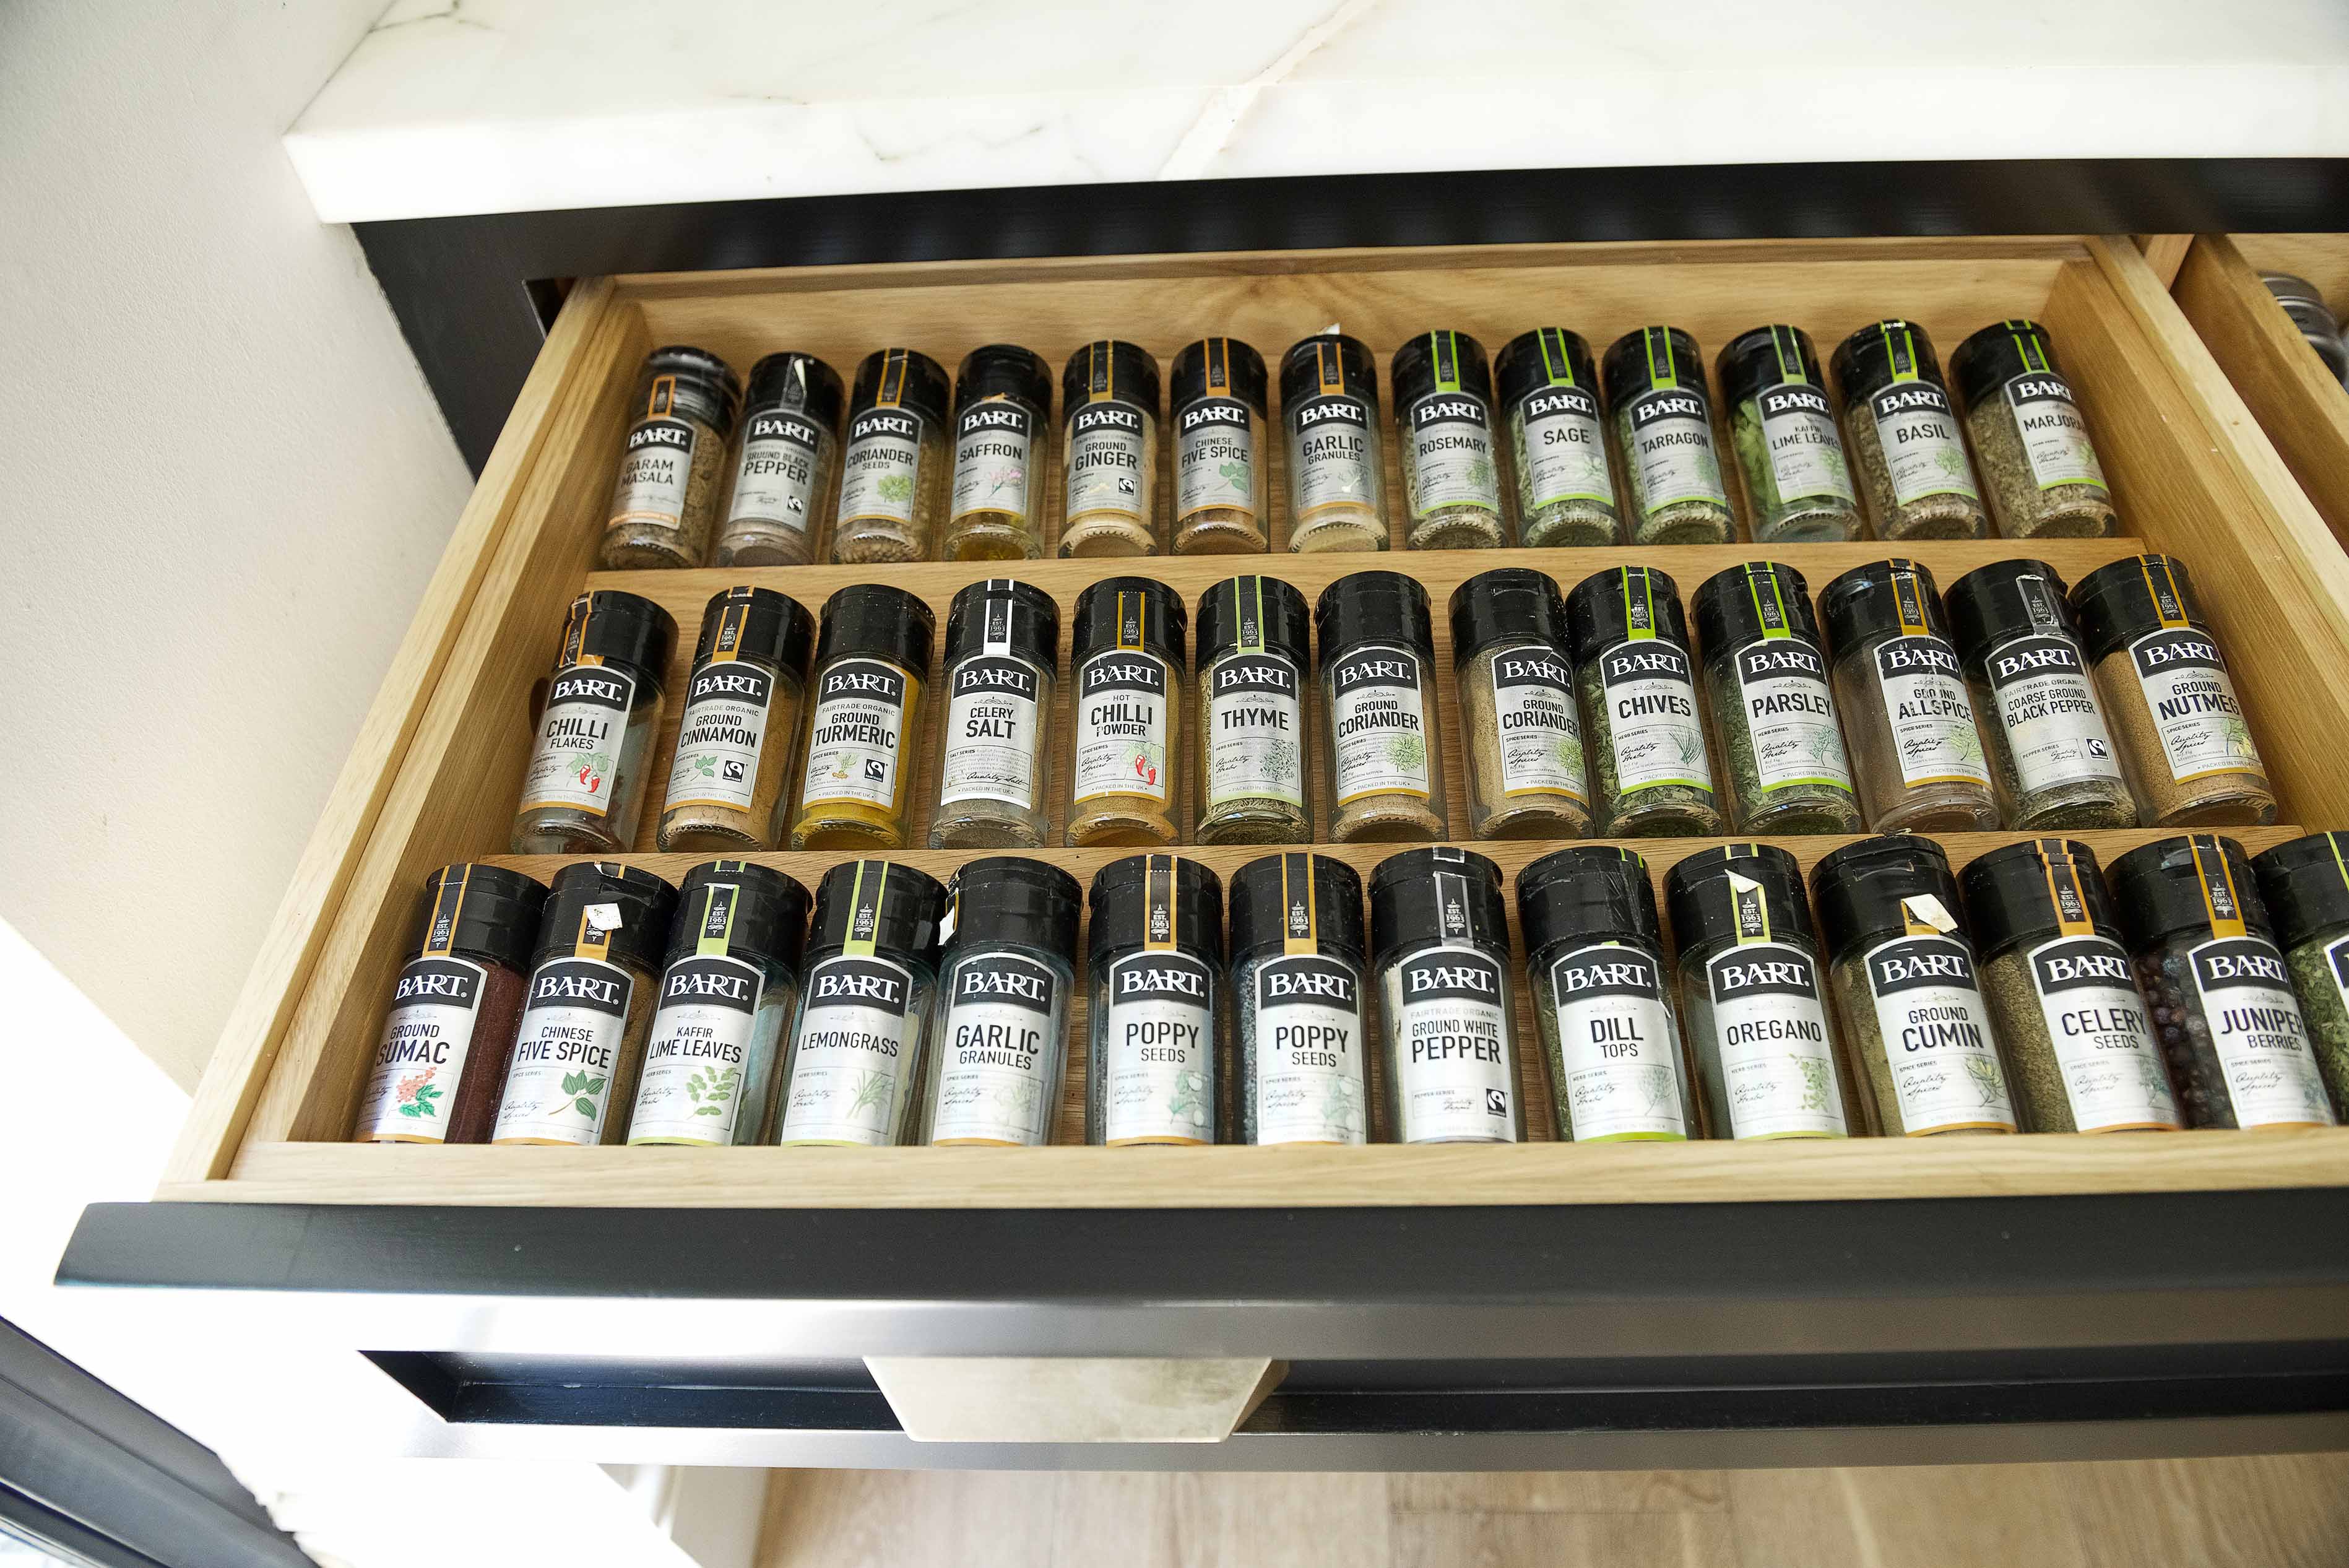 001. Bespoke kitchen shaker style utensil crockery spice rack tray cabinet storage pull out Perrin and Rowe Armac Martin Farrow and Ball near Hindhead, Hampshire